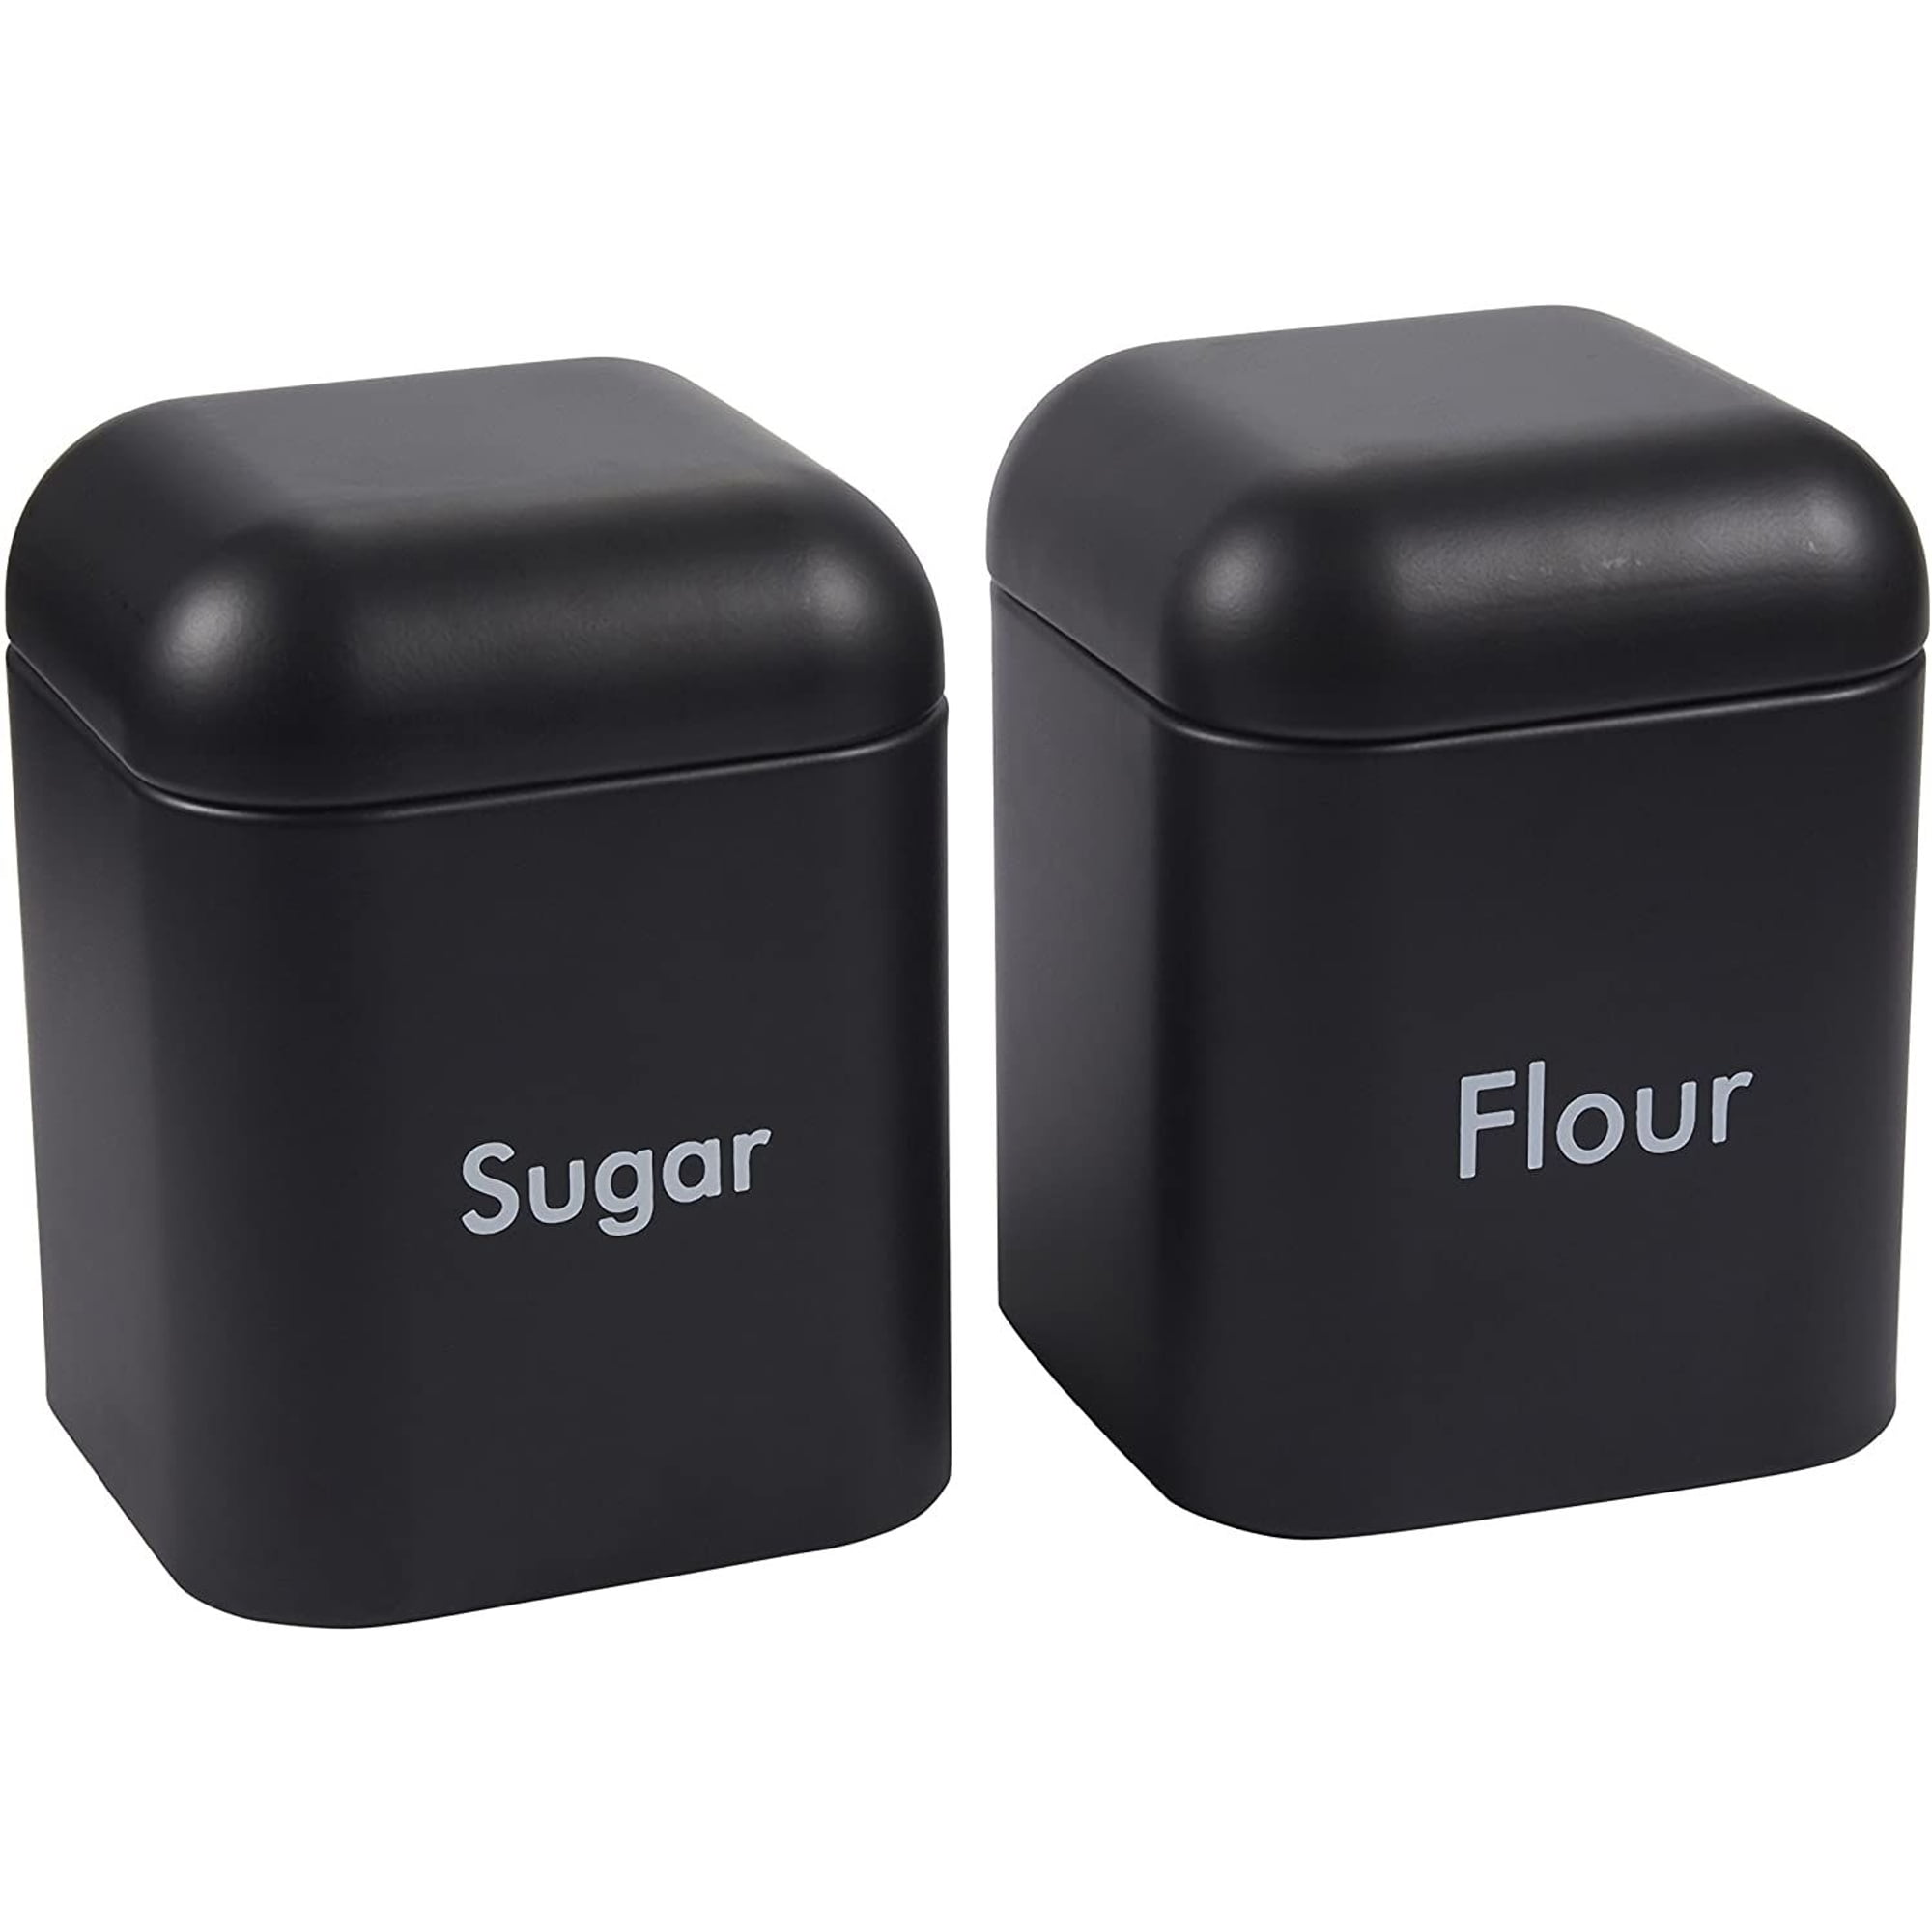 The Best Flour & Sugar Canisters